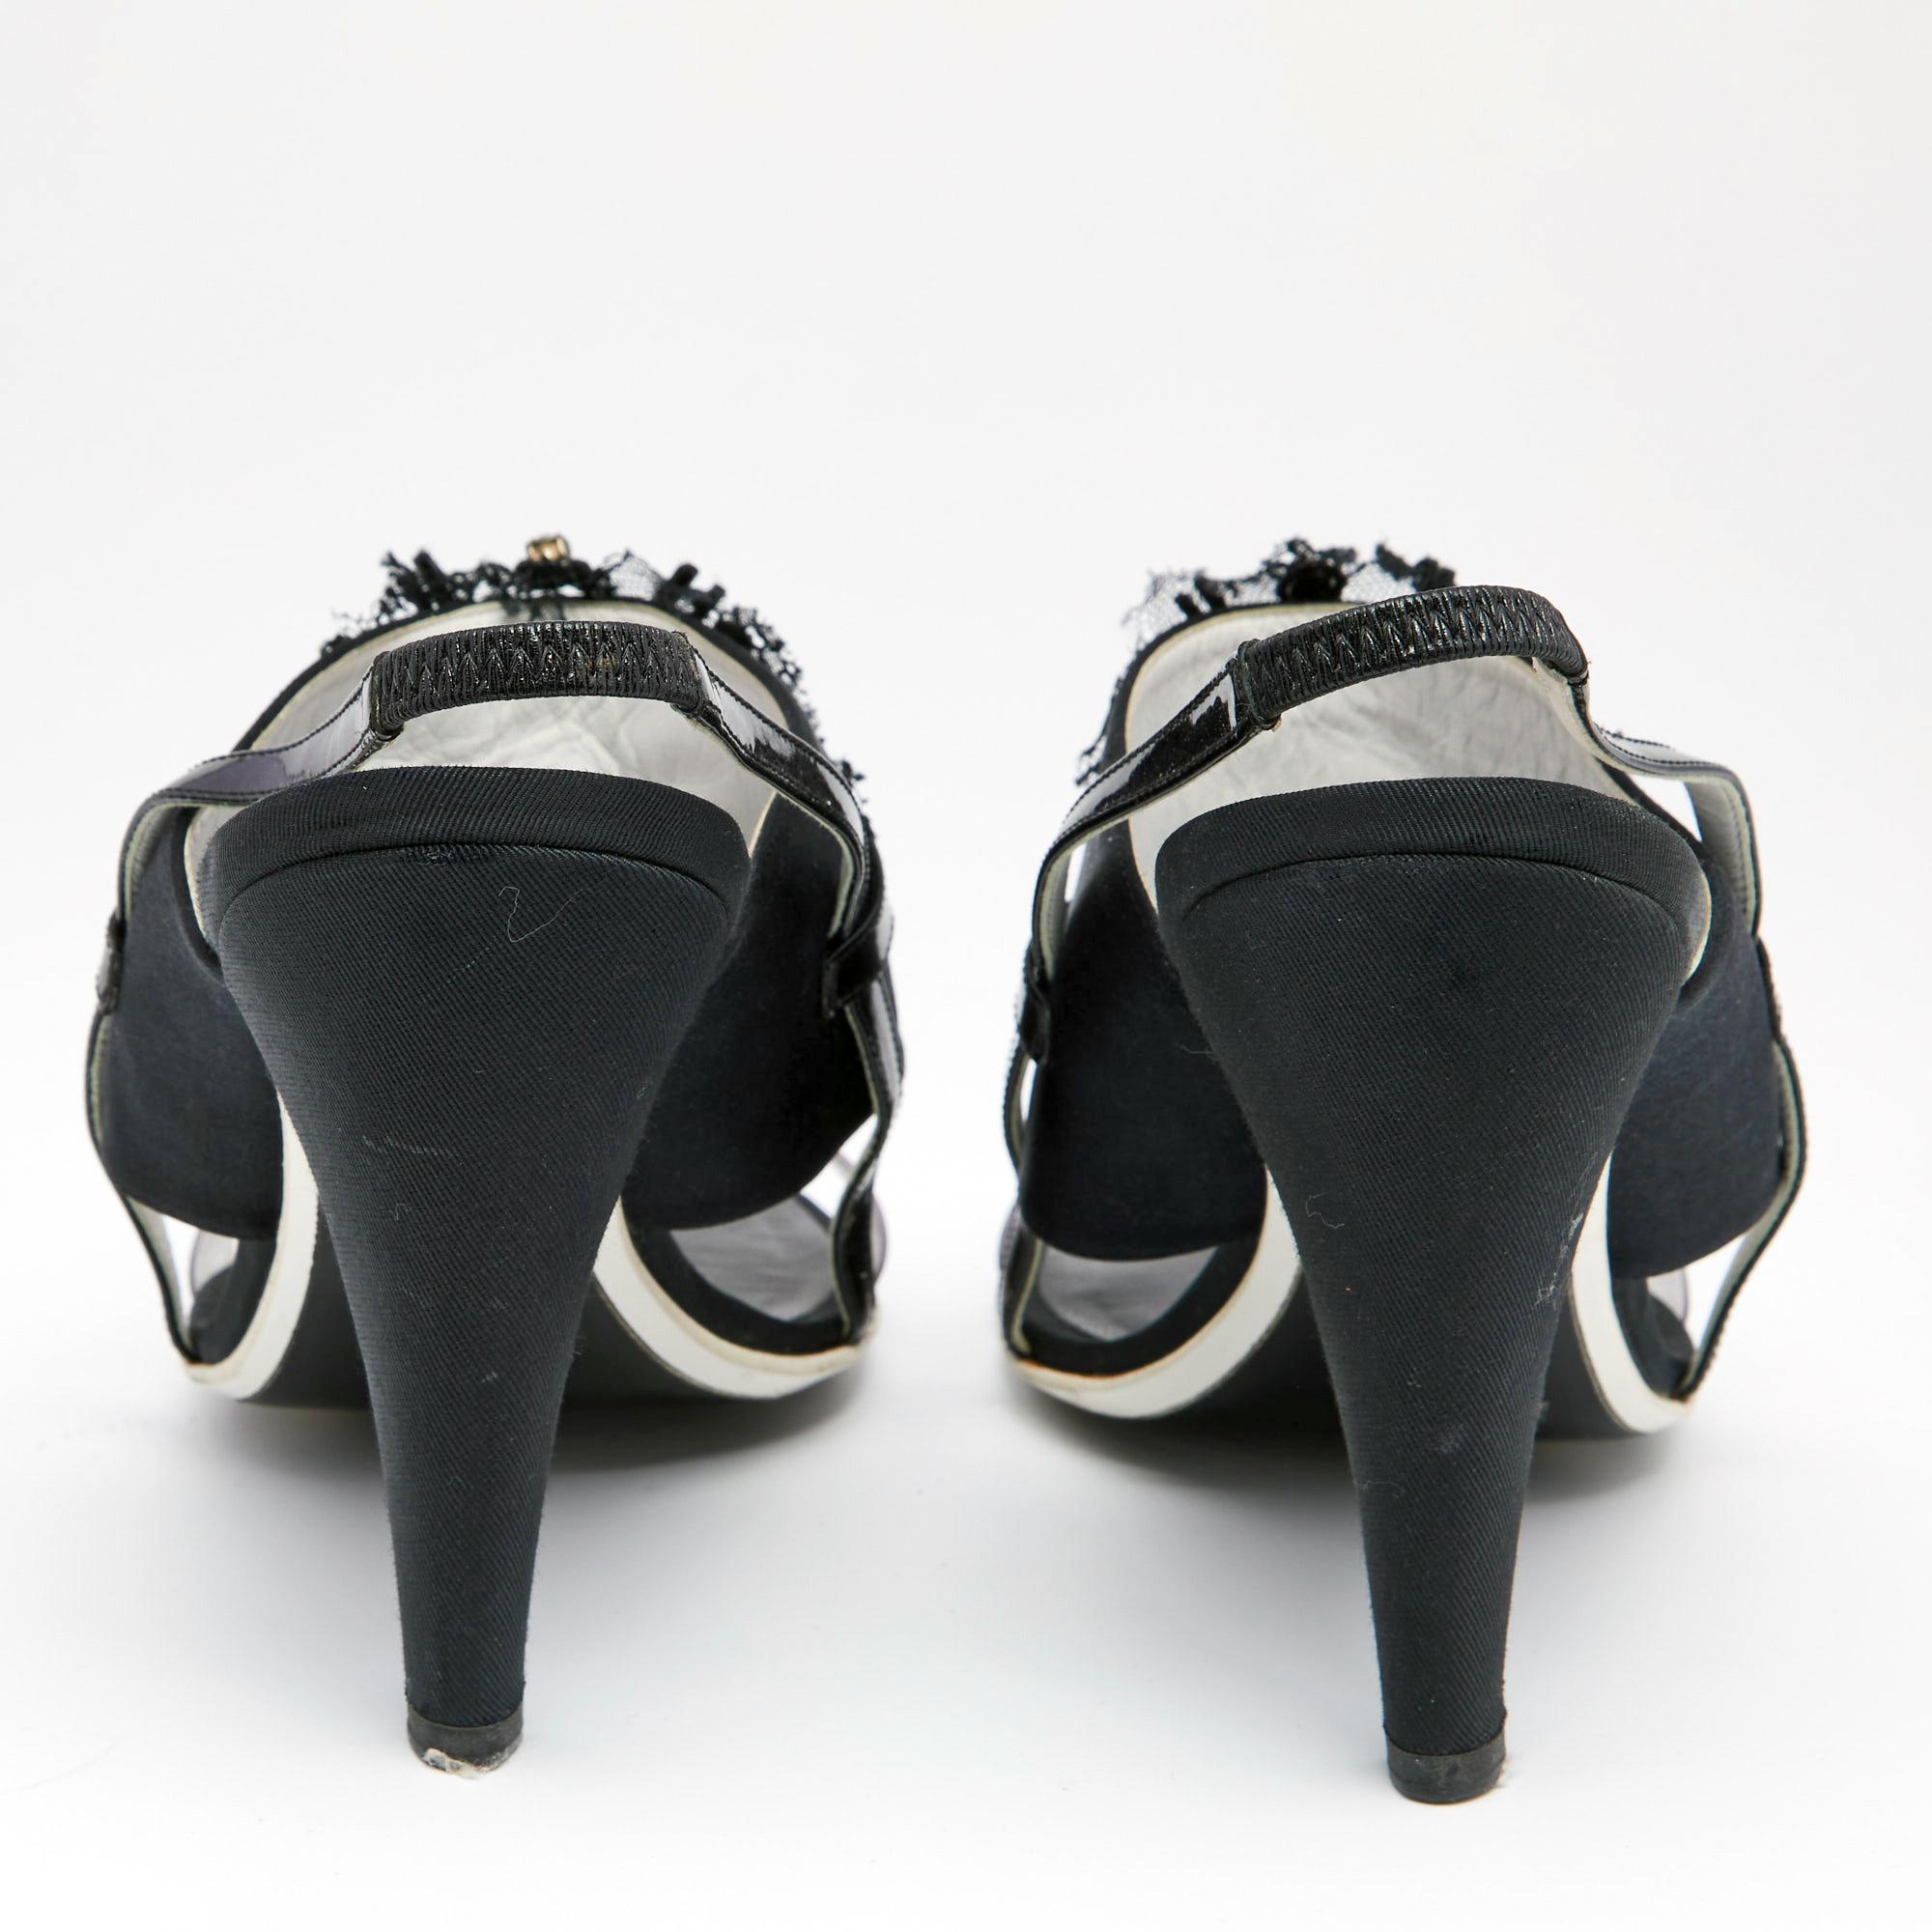 Chanel Black Satin And PVC Embellished Slingback Sandals Size 40 In Good Condition For Sale In Dubai, Al Qouz 2